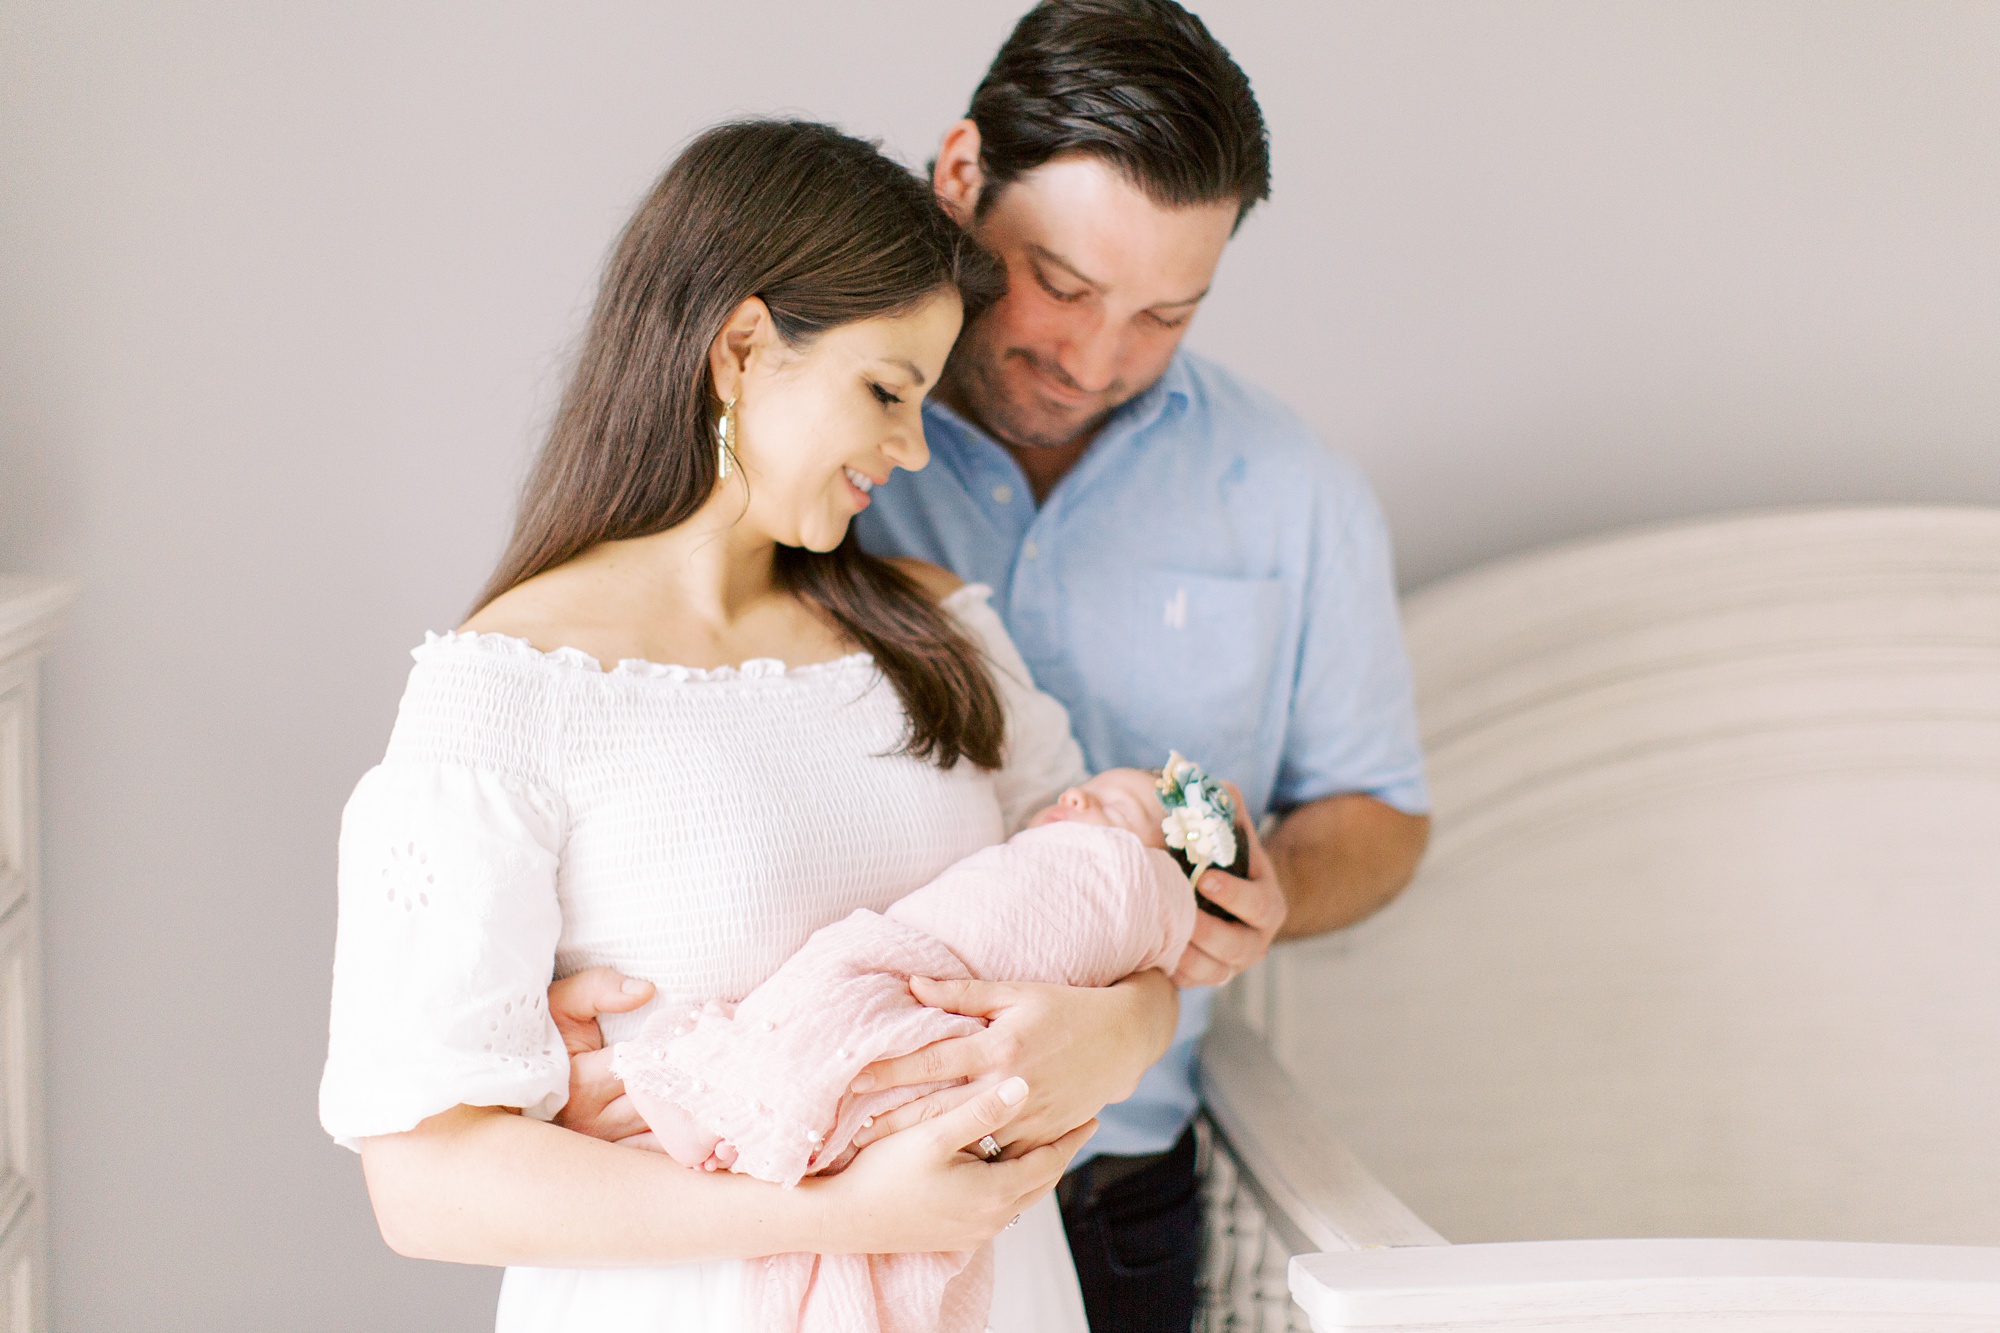 new parents look down at baby girl during newborn photos at home